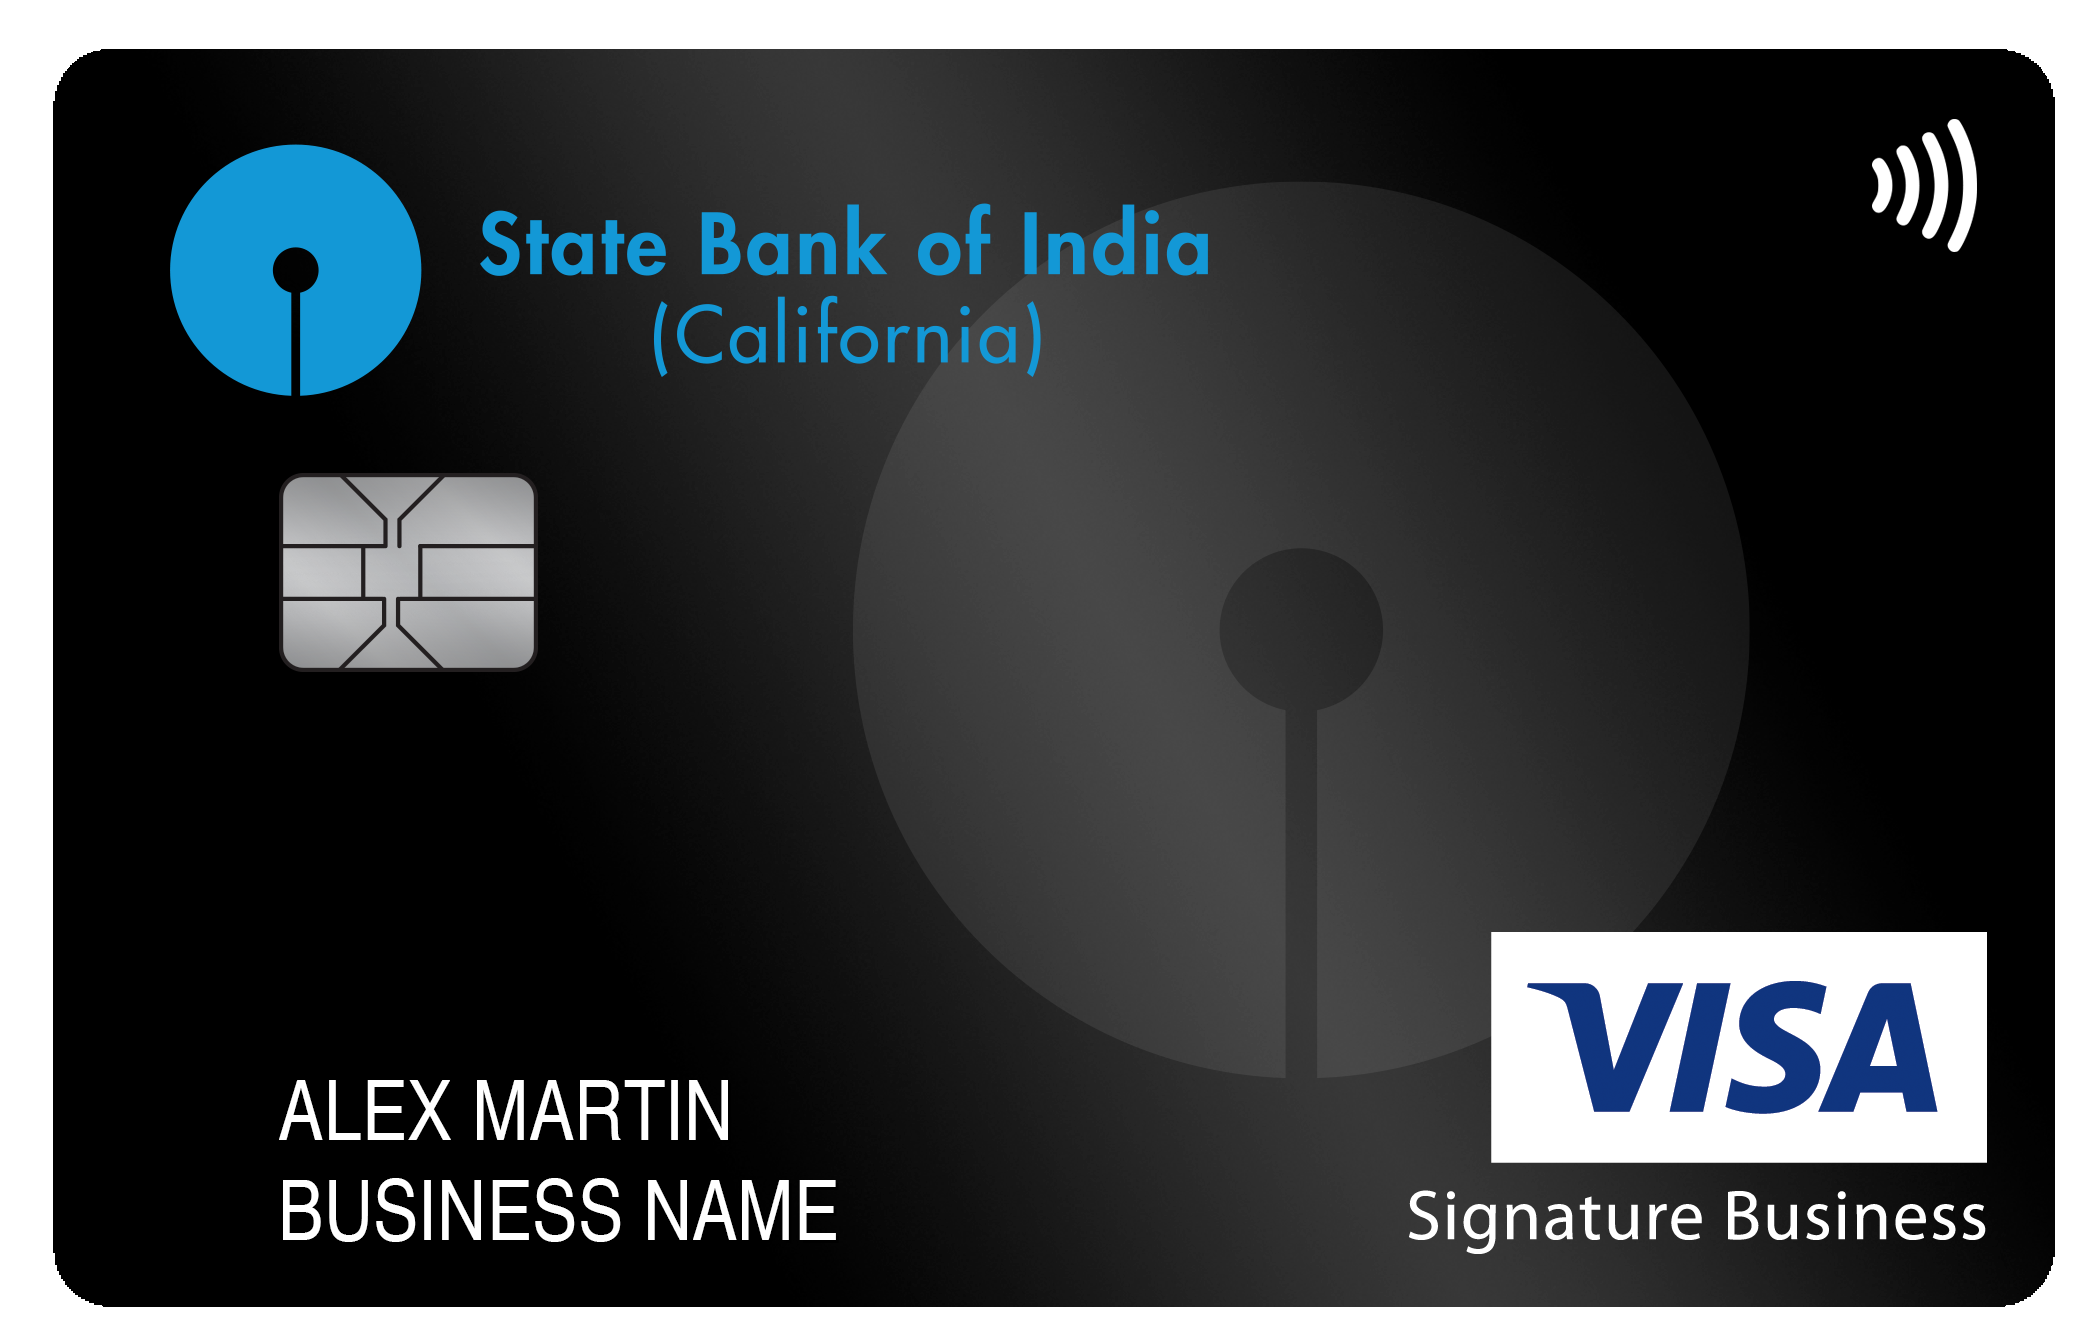 State Bank of India (California) Smart Business Rewards Card